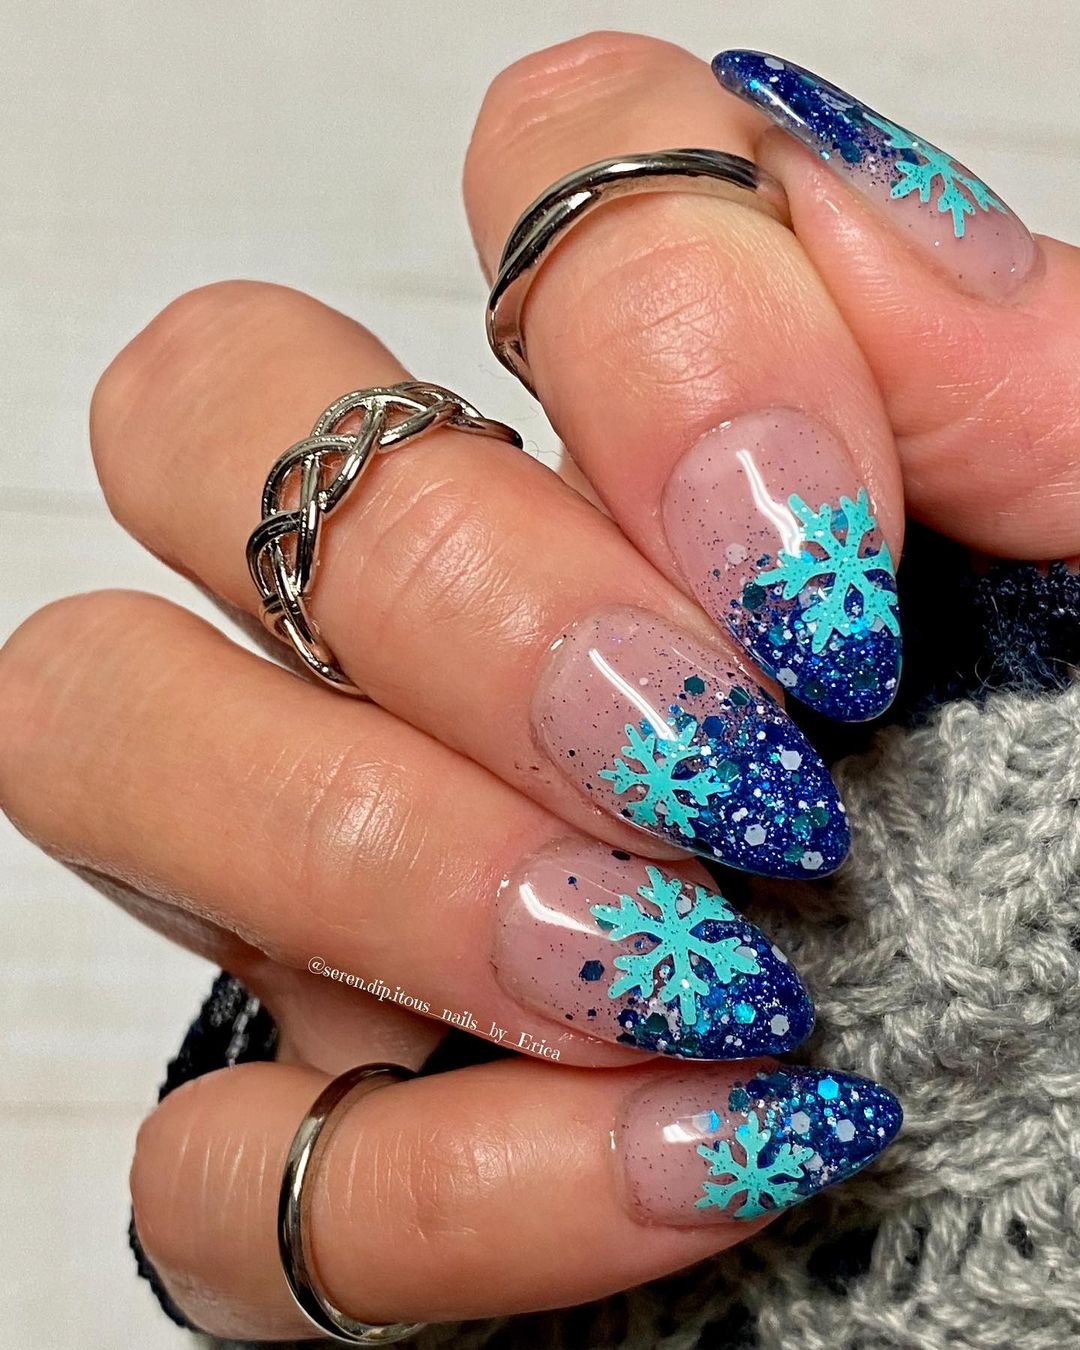 Nails with icy blue design.